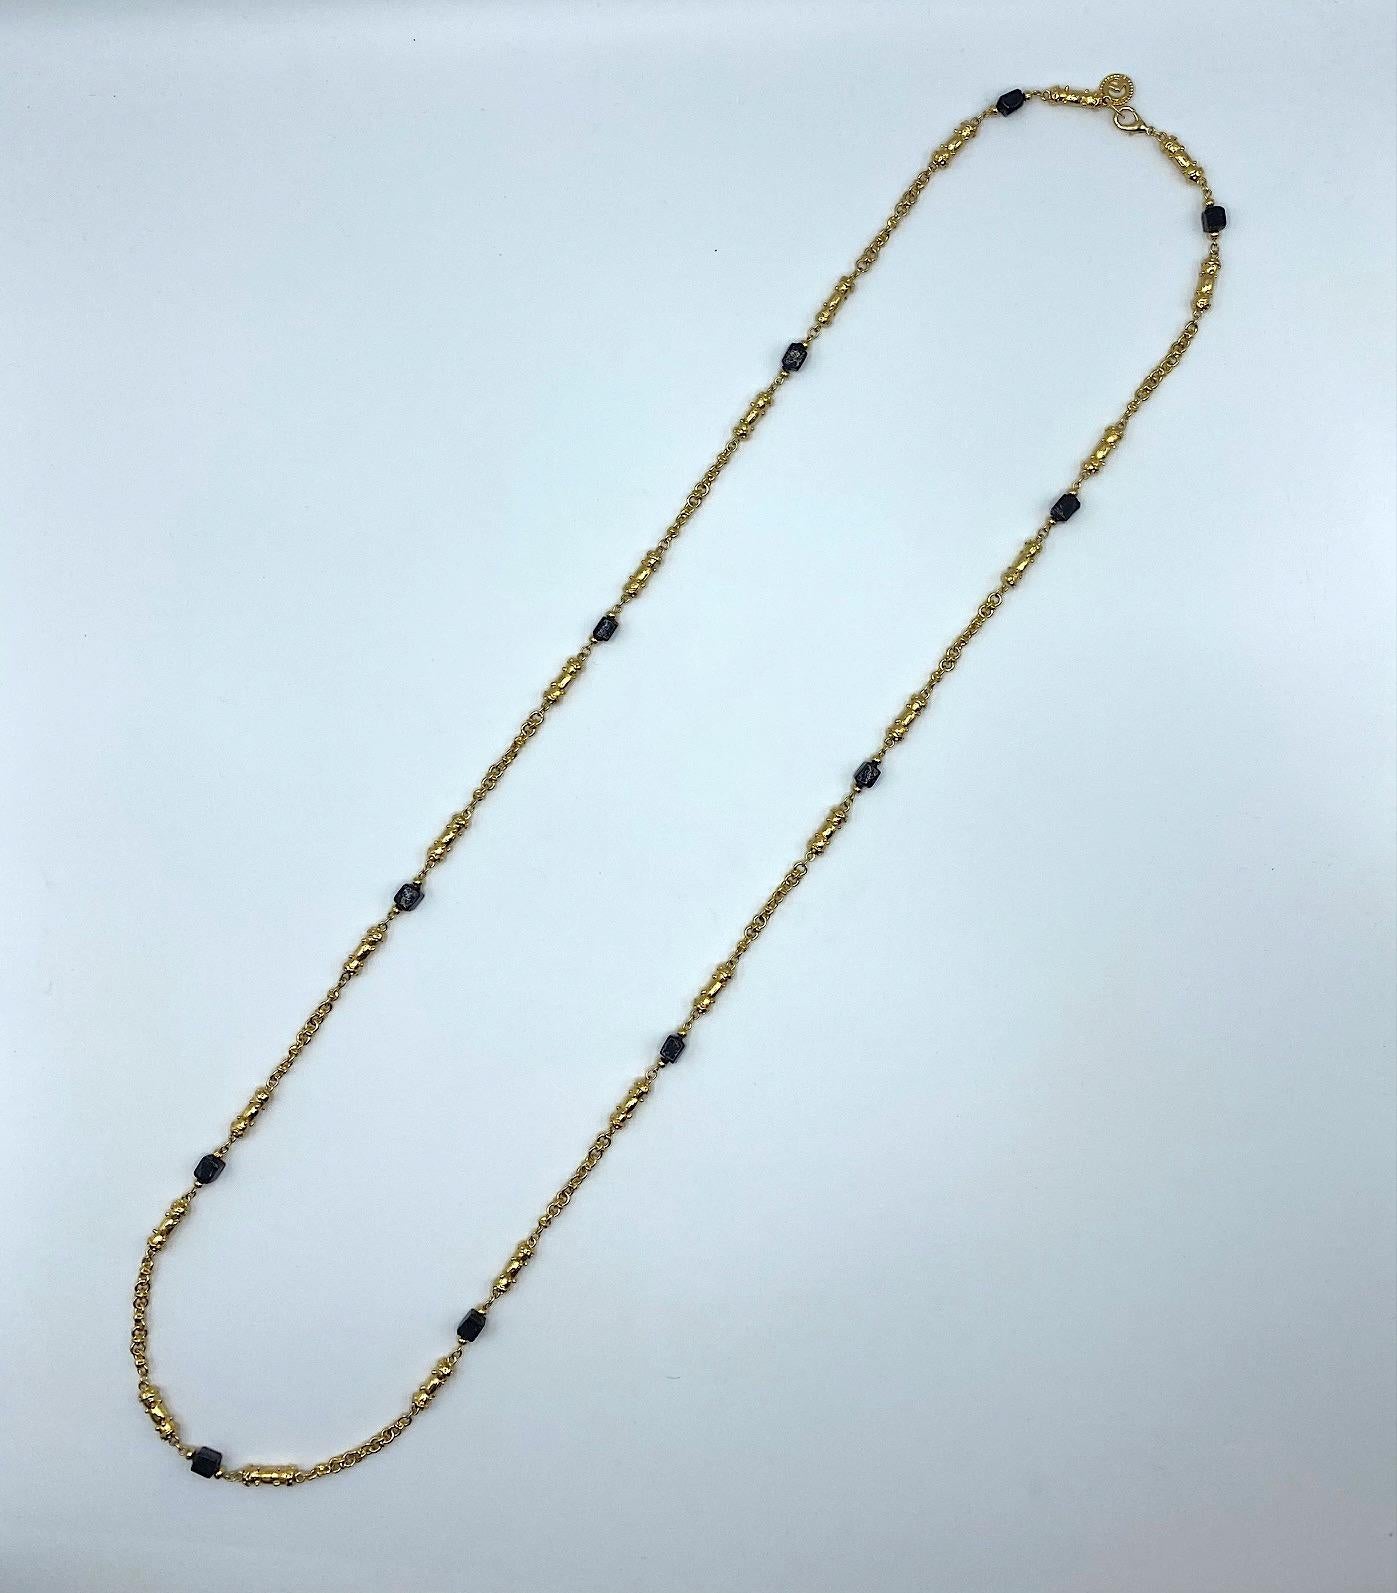 St. John Collection classic gold long necklace with back glass beads circa 1990. The chain is a mix of gold plate round links, cast gold beadwork long links and hand formed black glass cube shape beads. Each glass bead is unique and different